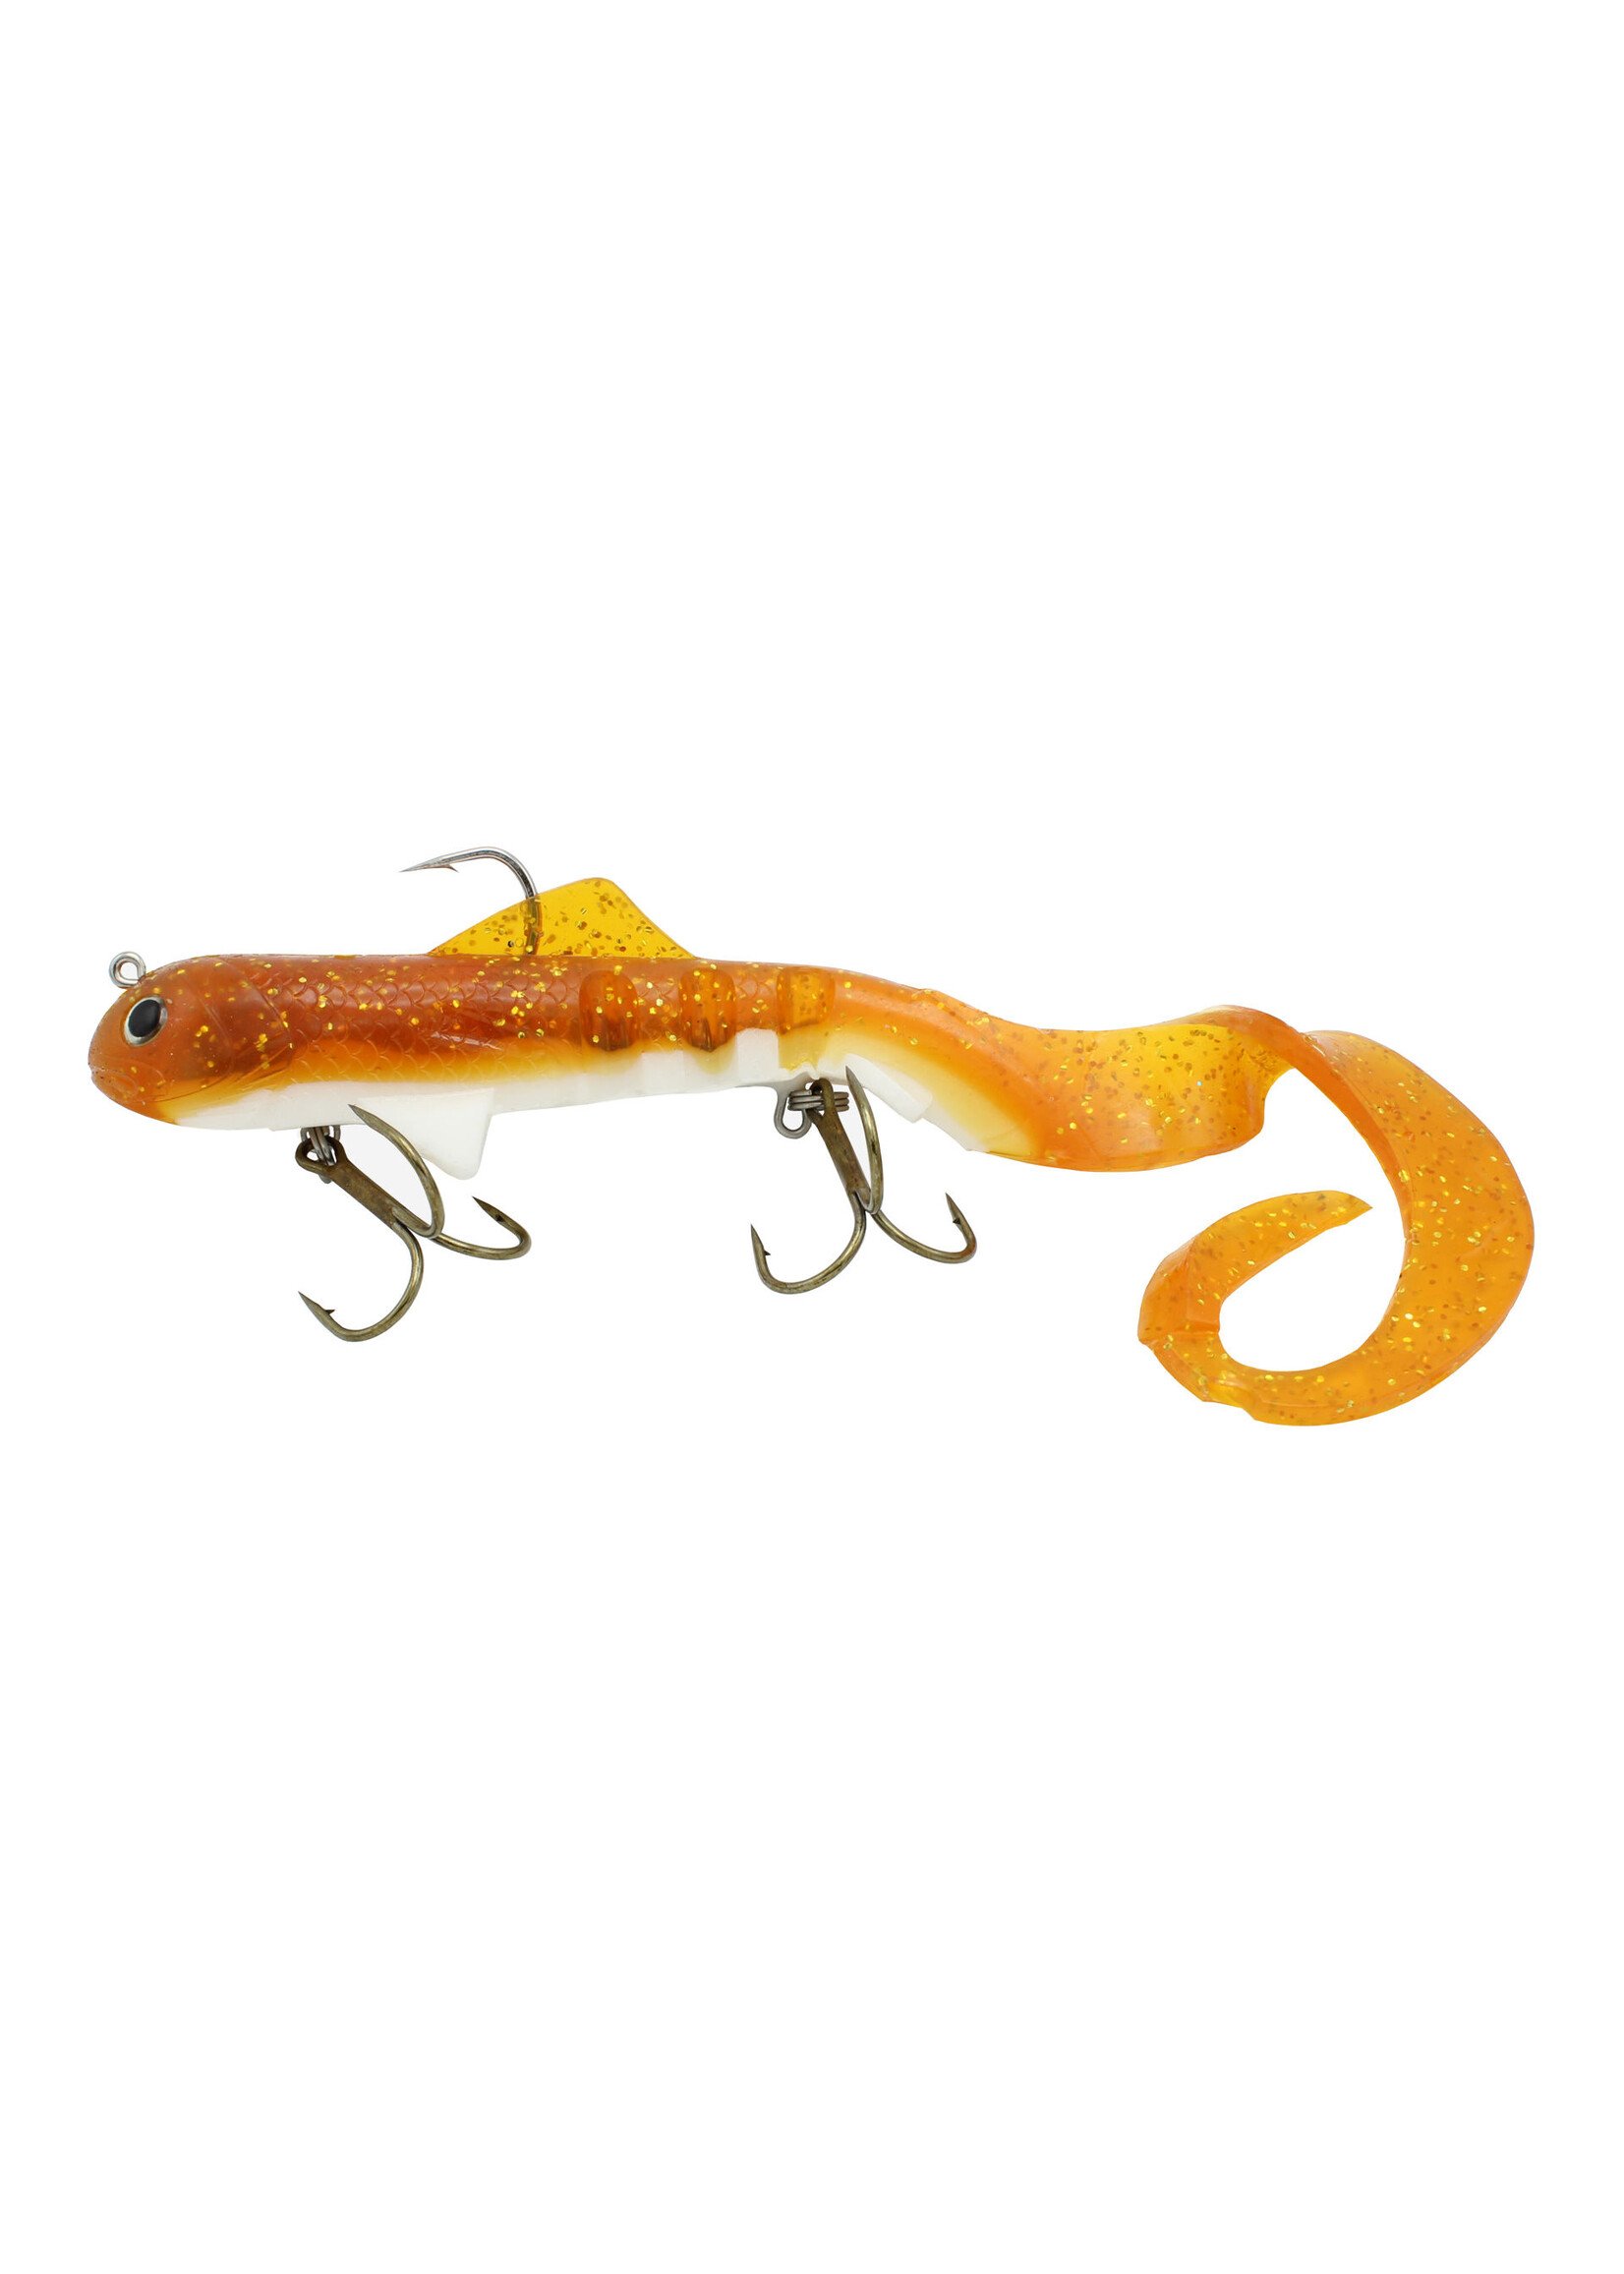 Tackle Industries Superd Musky Bait and Northern Pike Musky Lure